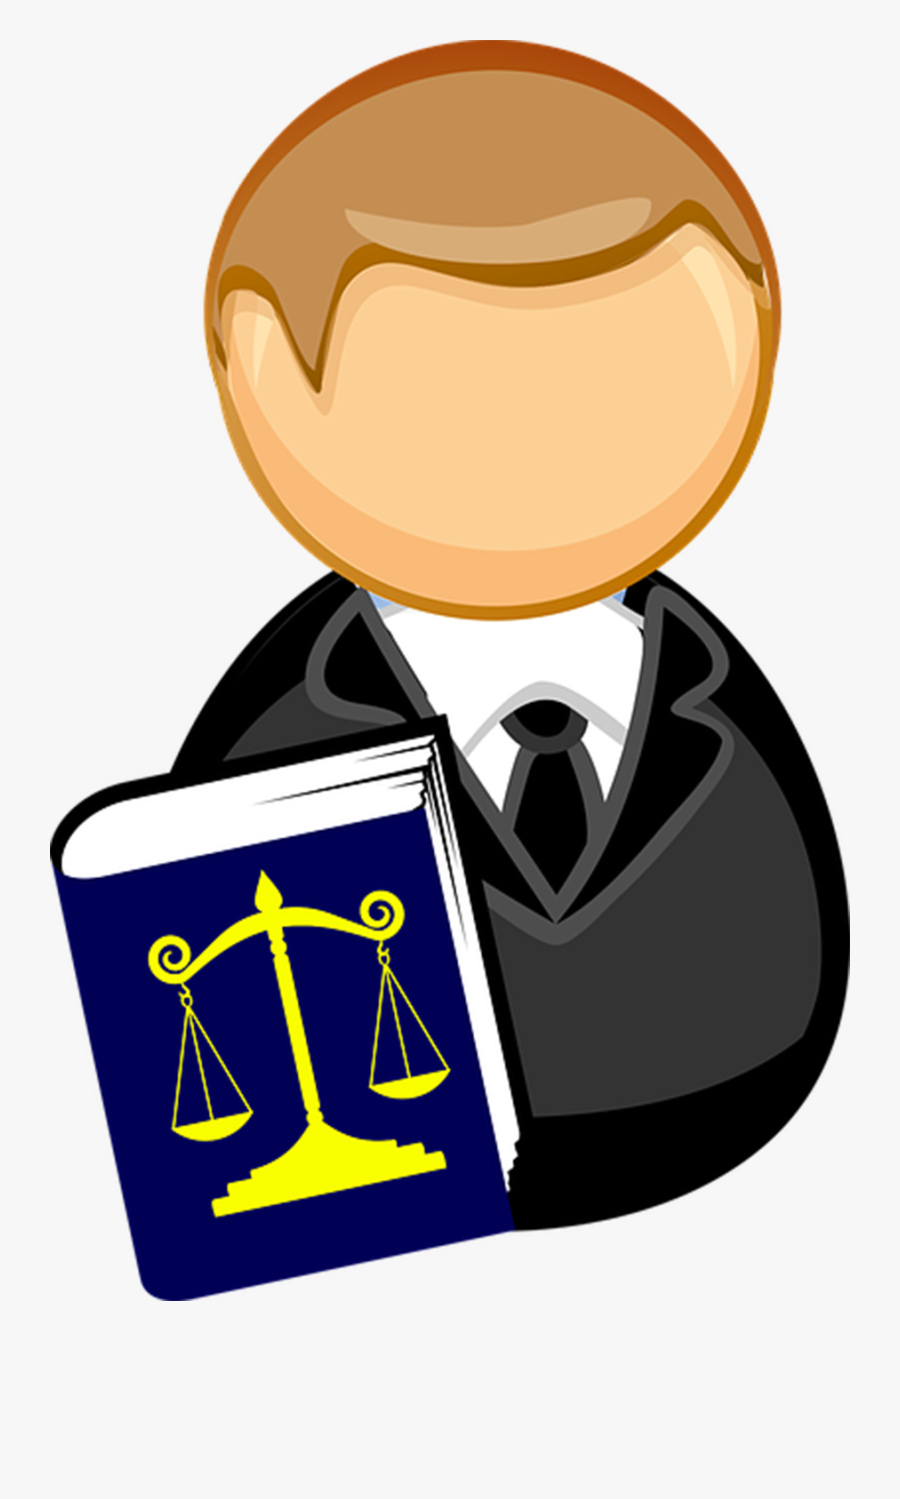 Debt Collection Cross Channel - Lawyer Clipart Png, Transparent Clipart